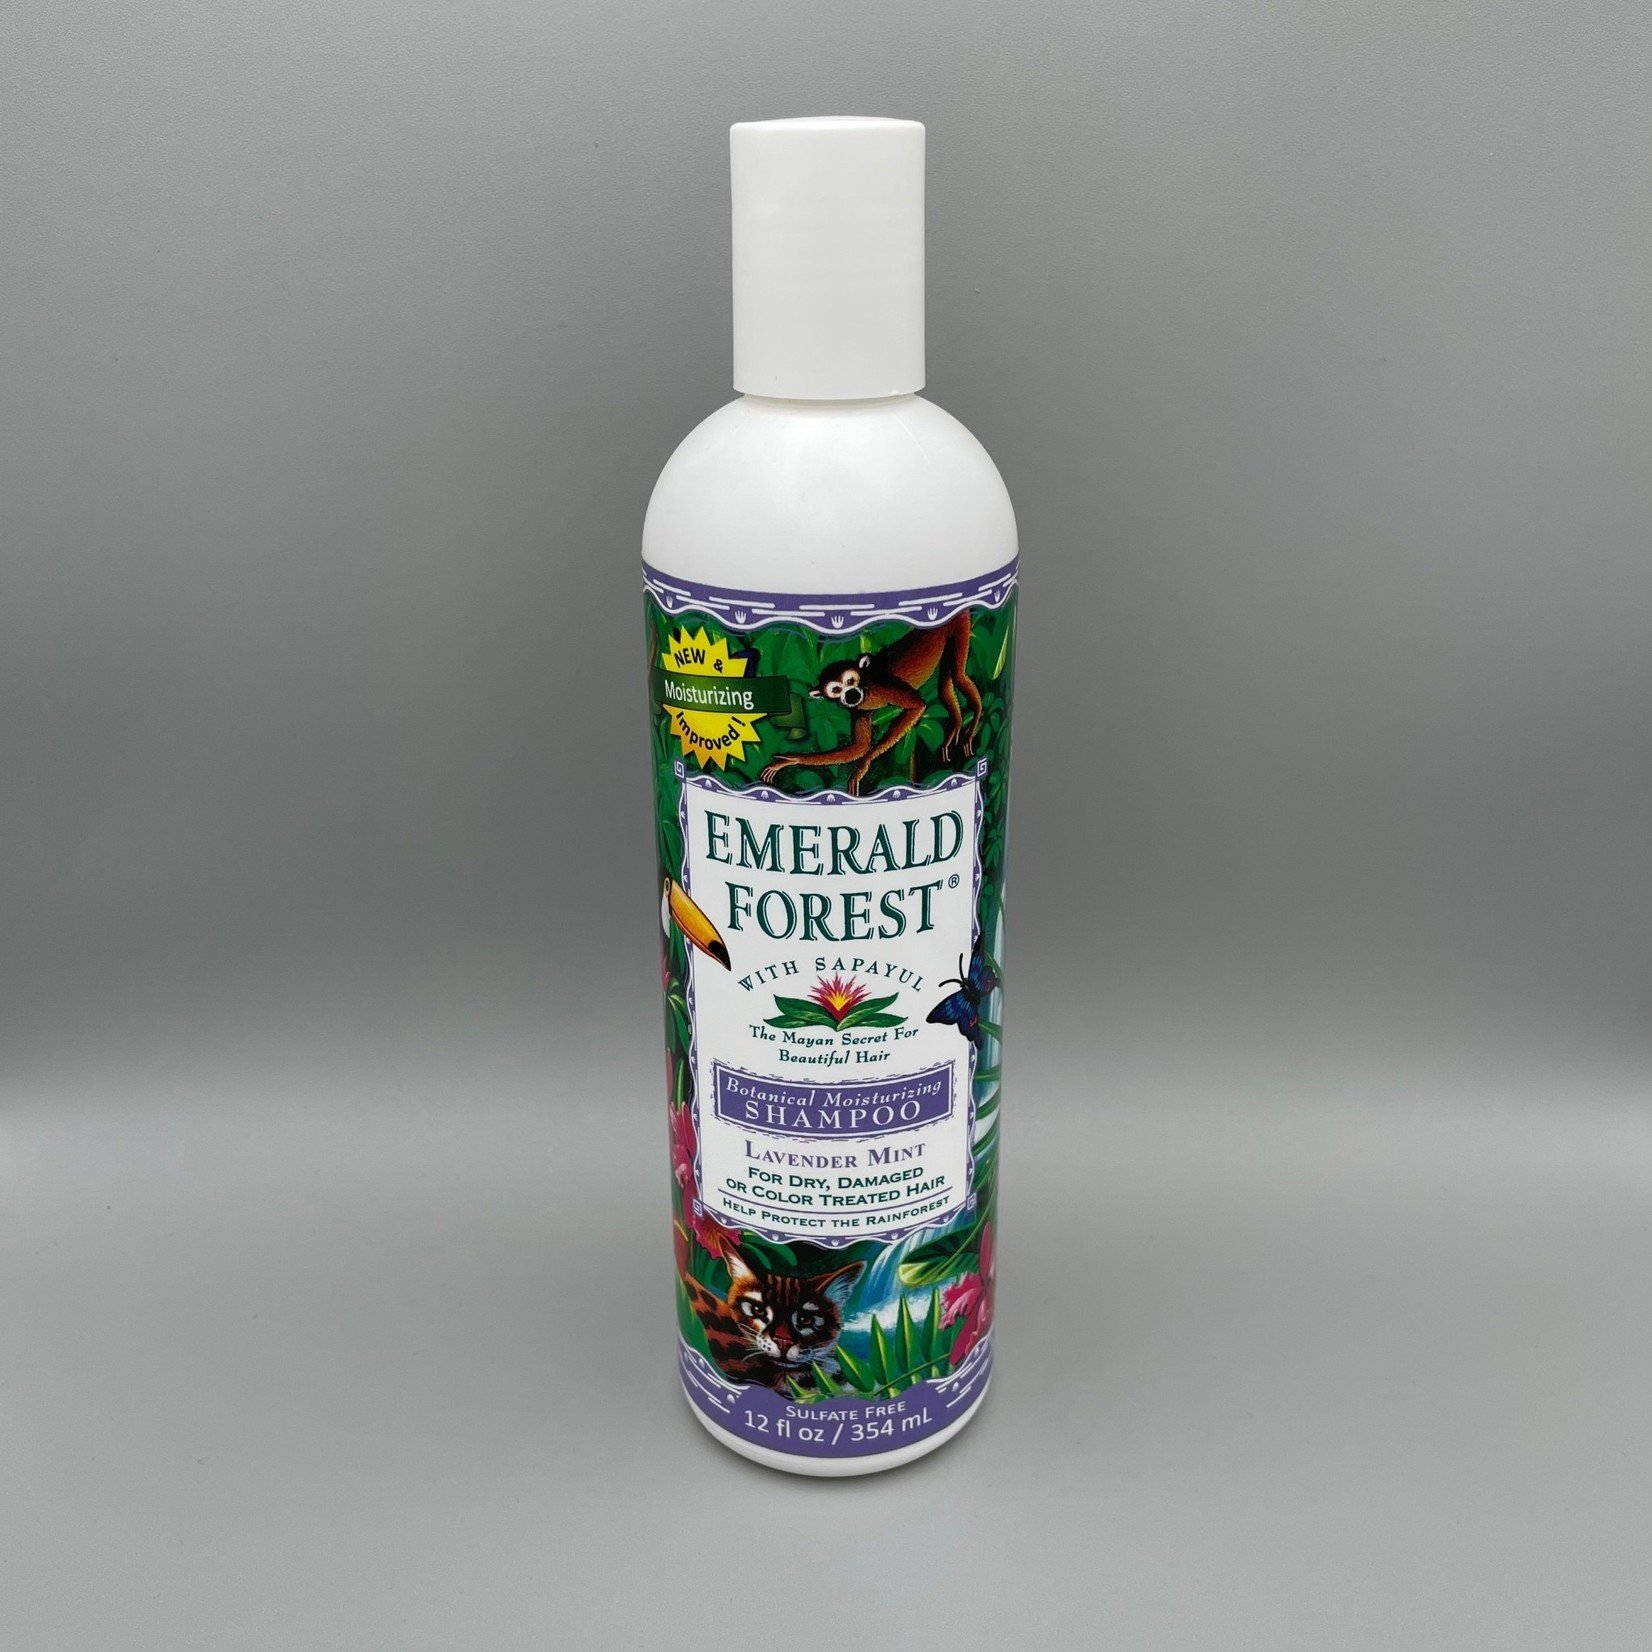 Emerald Forest Emerald Forest Shampoo - Lavender Mint